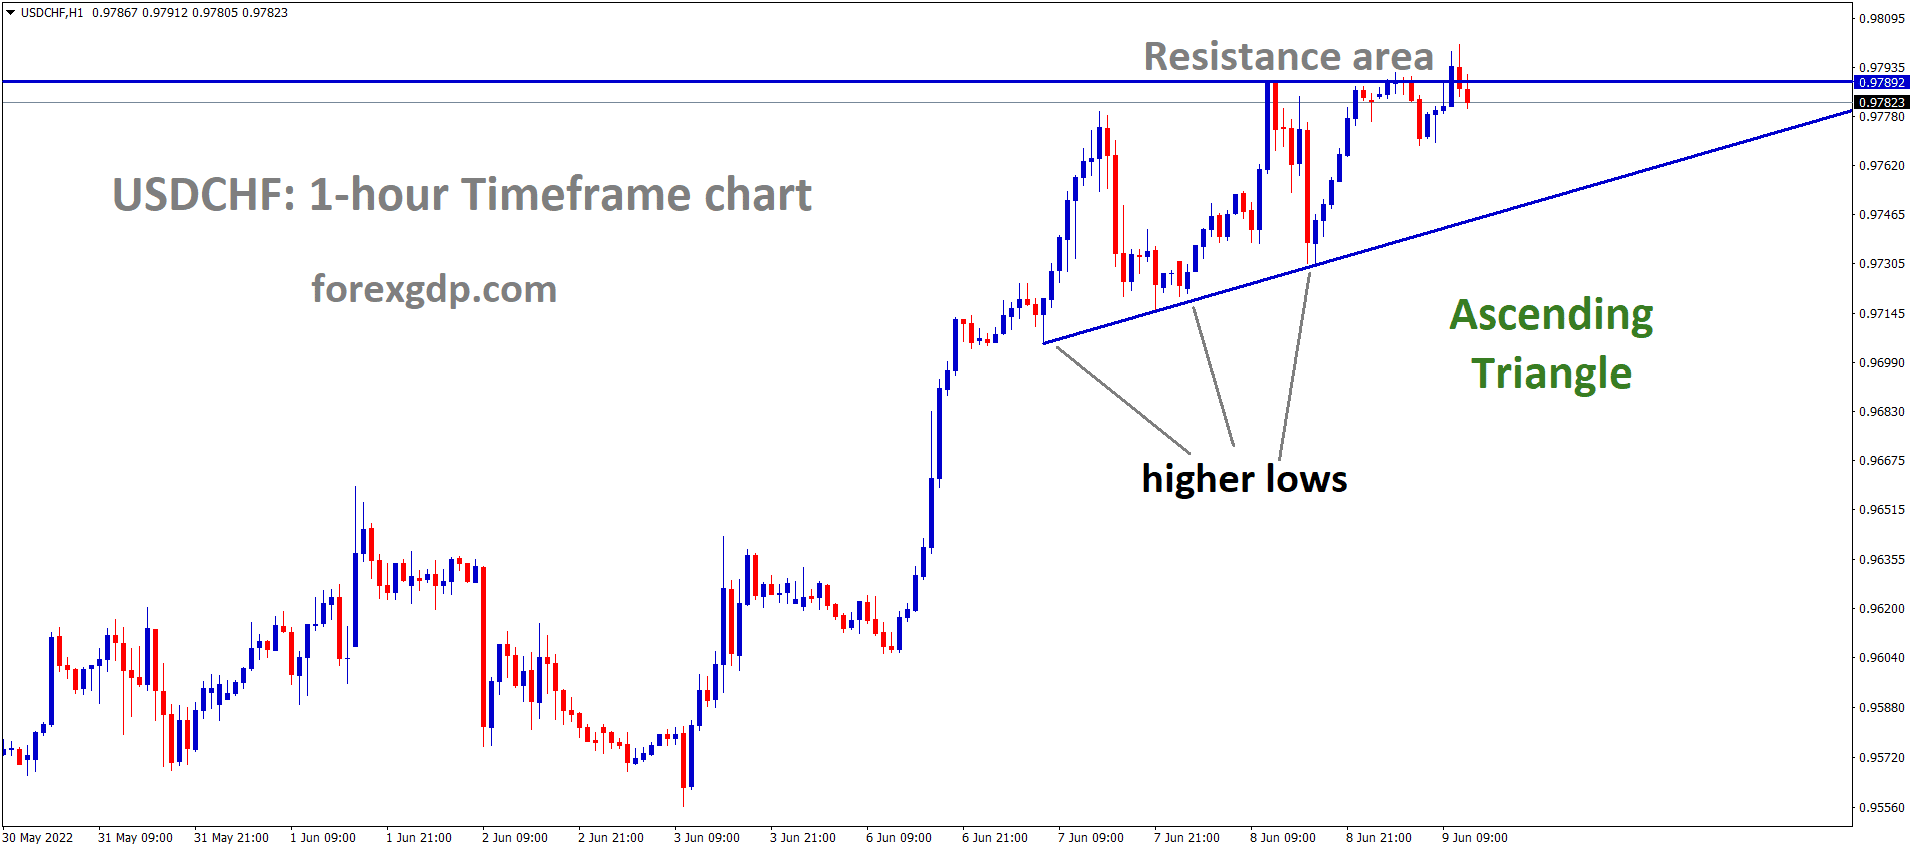 USDCHF is moving in an Ascending triangle pattern and the market has Fallen from the Horizontal resistance area of the Pattern